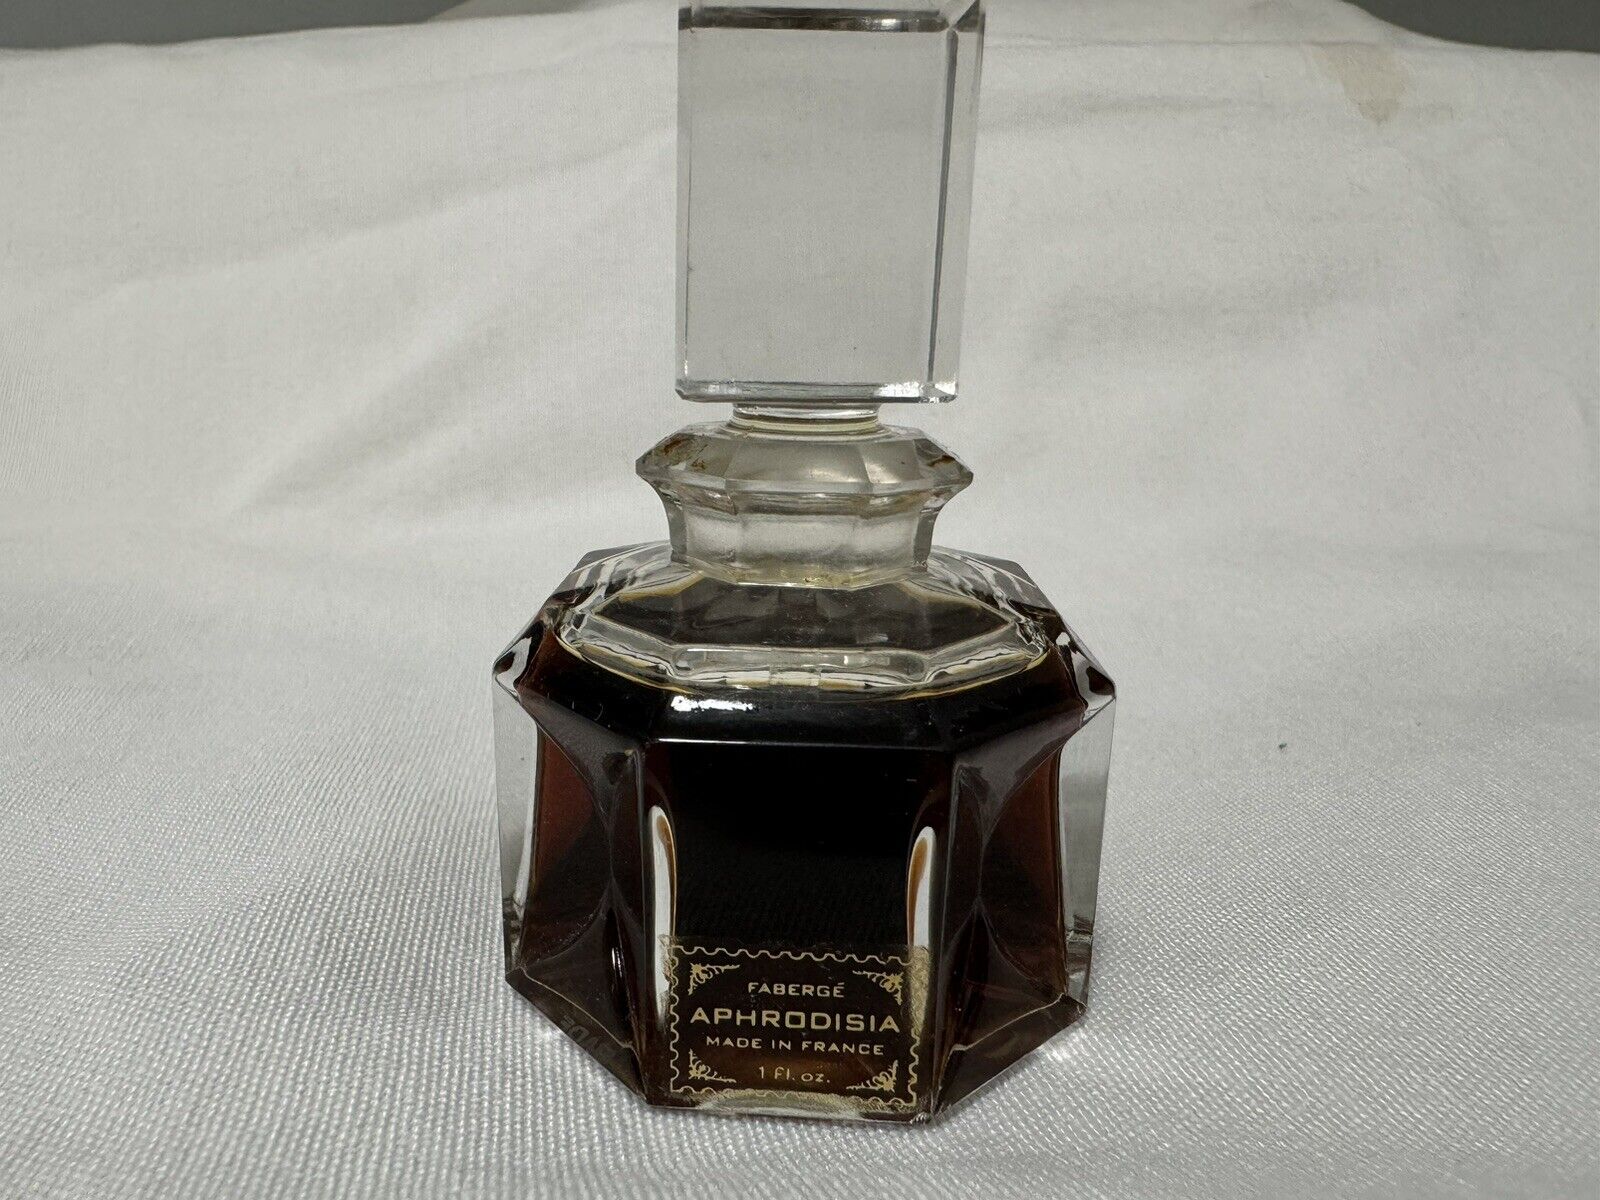 RARE Vintage Faberge Aphrodisia Perfume in Faberge Crystal Bottle Made in France